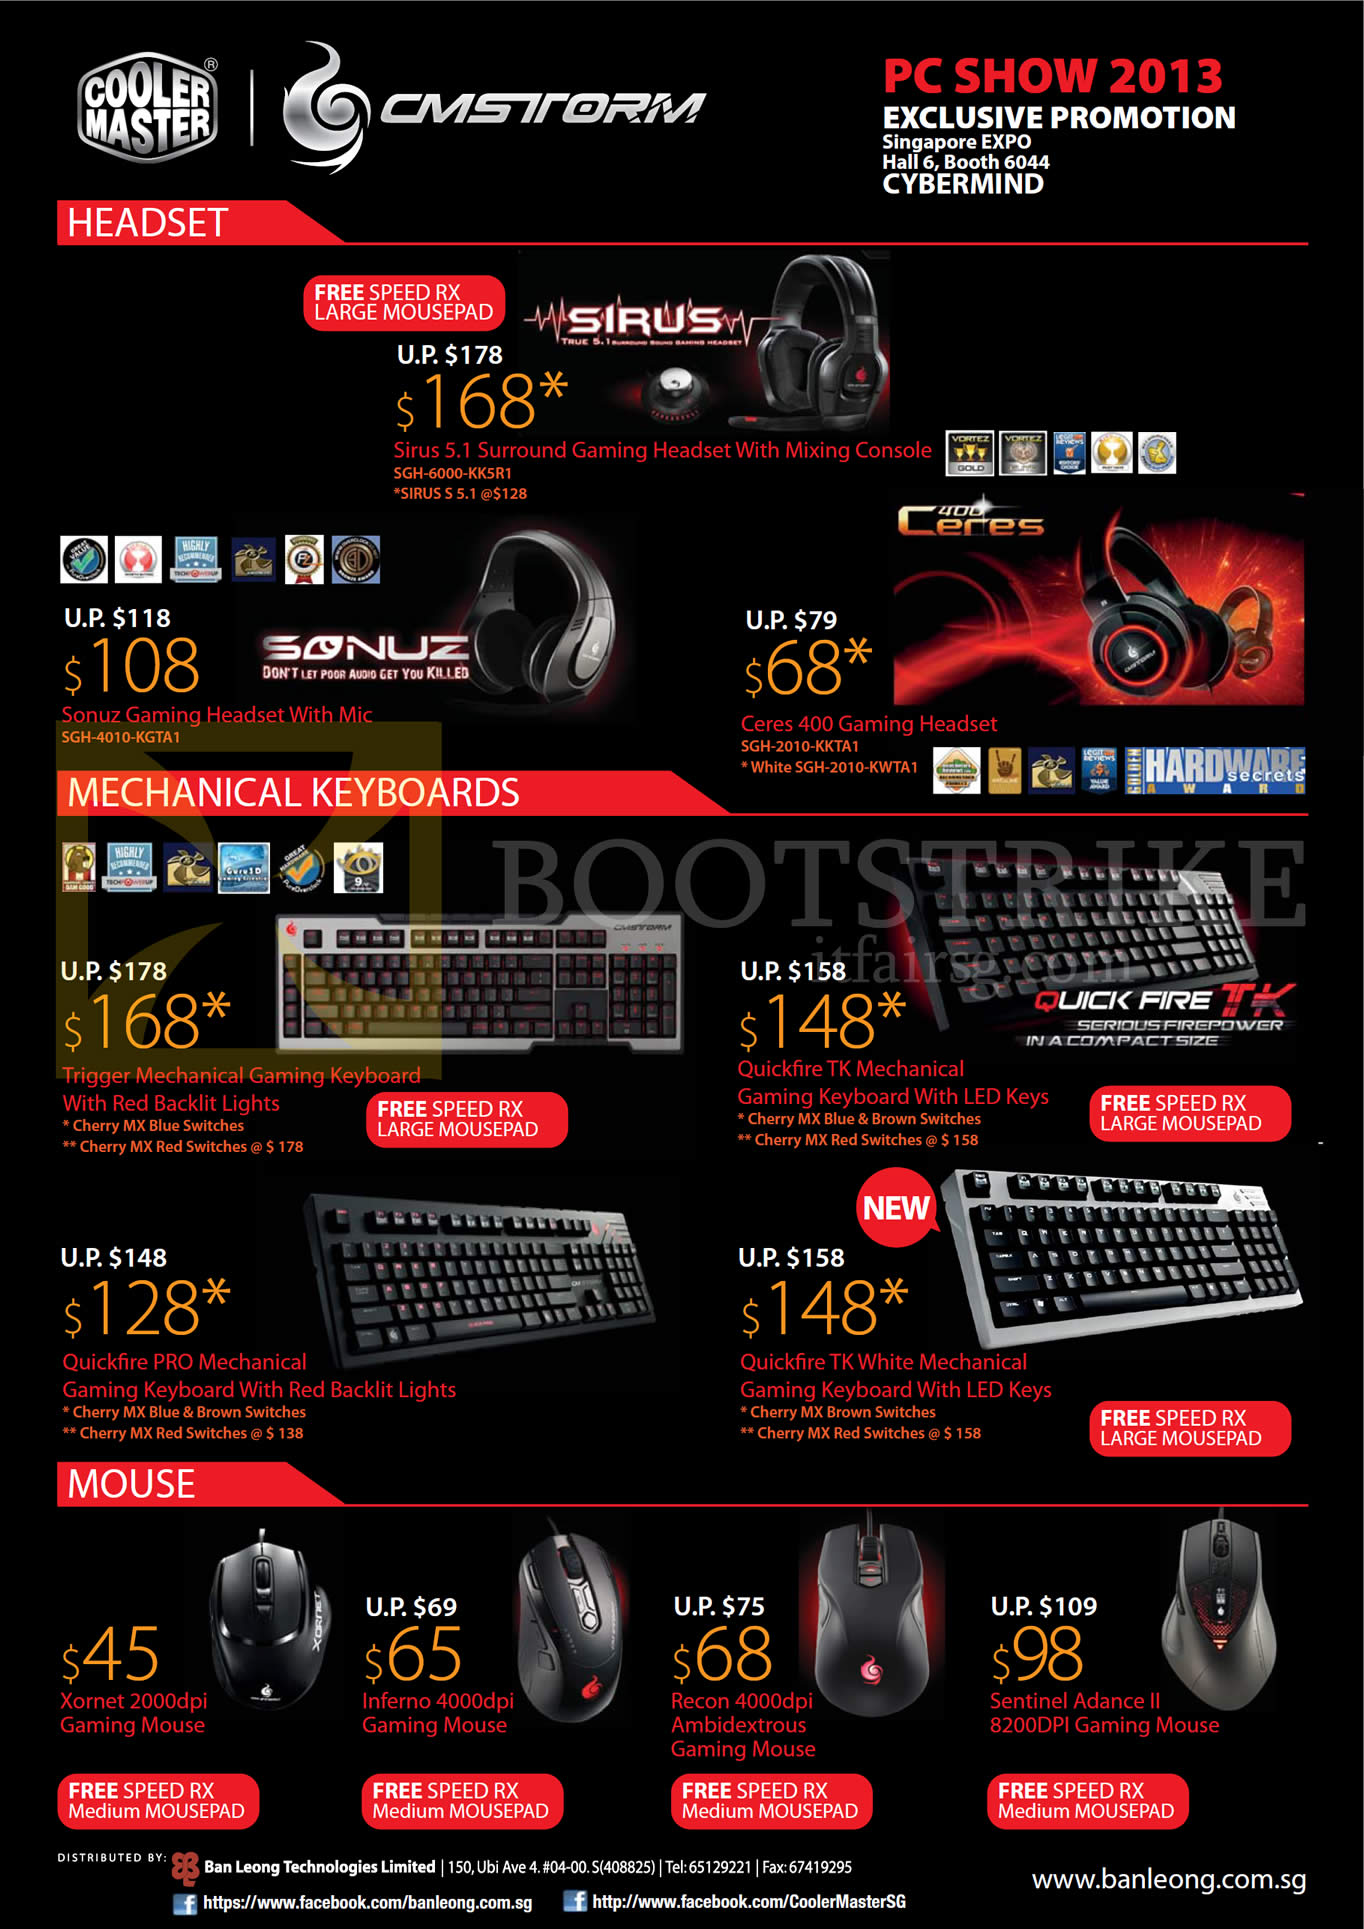 PC SHOW 2013 price list image brochure of Cybermind Cooler Master CM Storm Headset Sirus, Ceres 400, Sonuz, Mechanical Keyboards Trigger, Quickfire TK, Pro, Mouse Xornet, Inferno, Recon, Sentinel Adance II